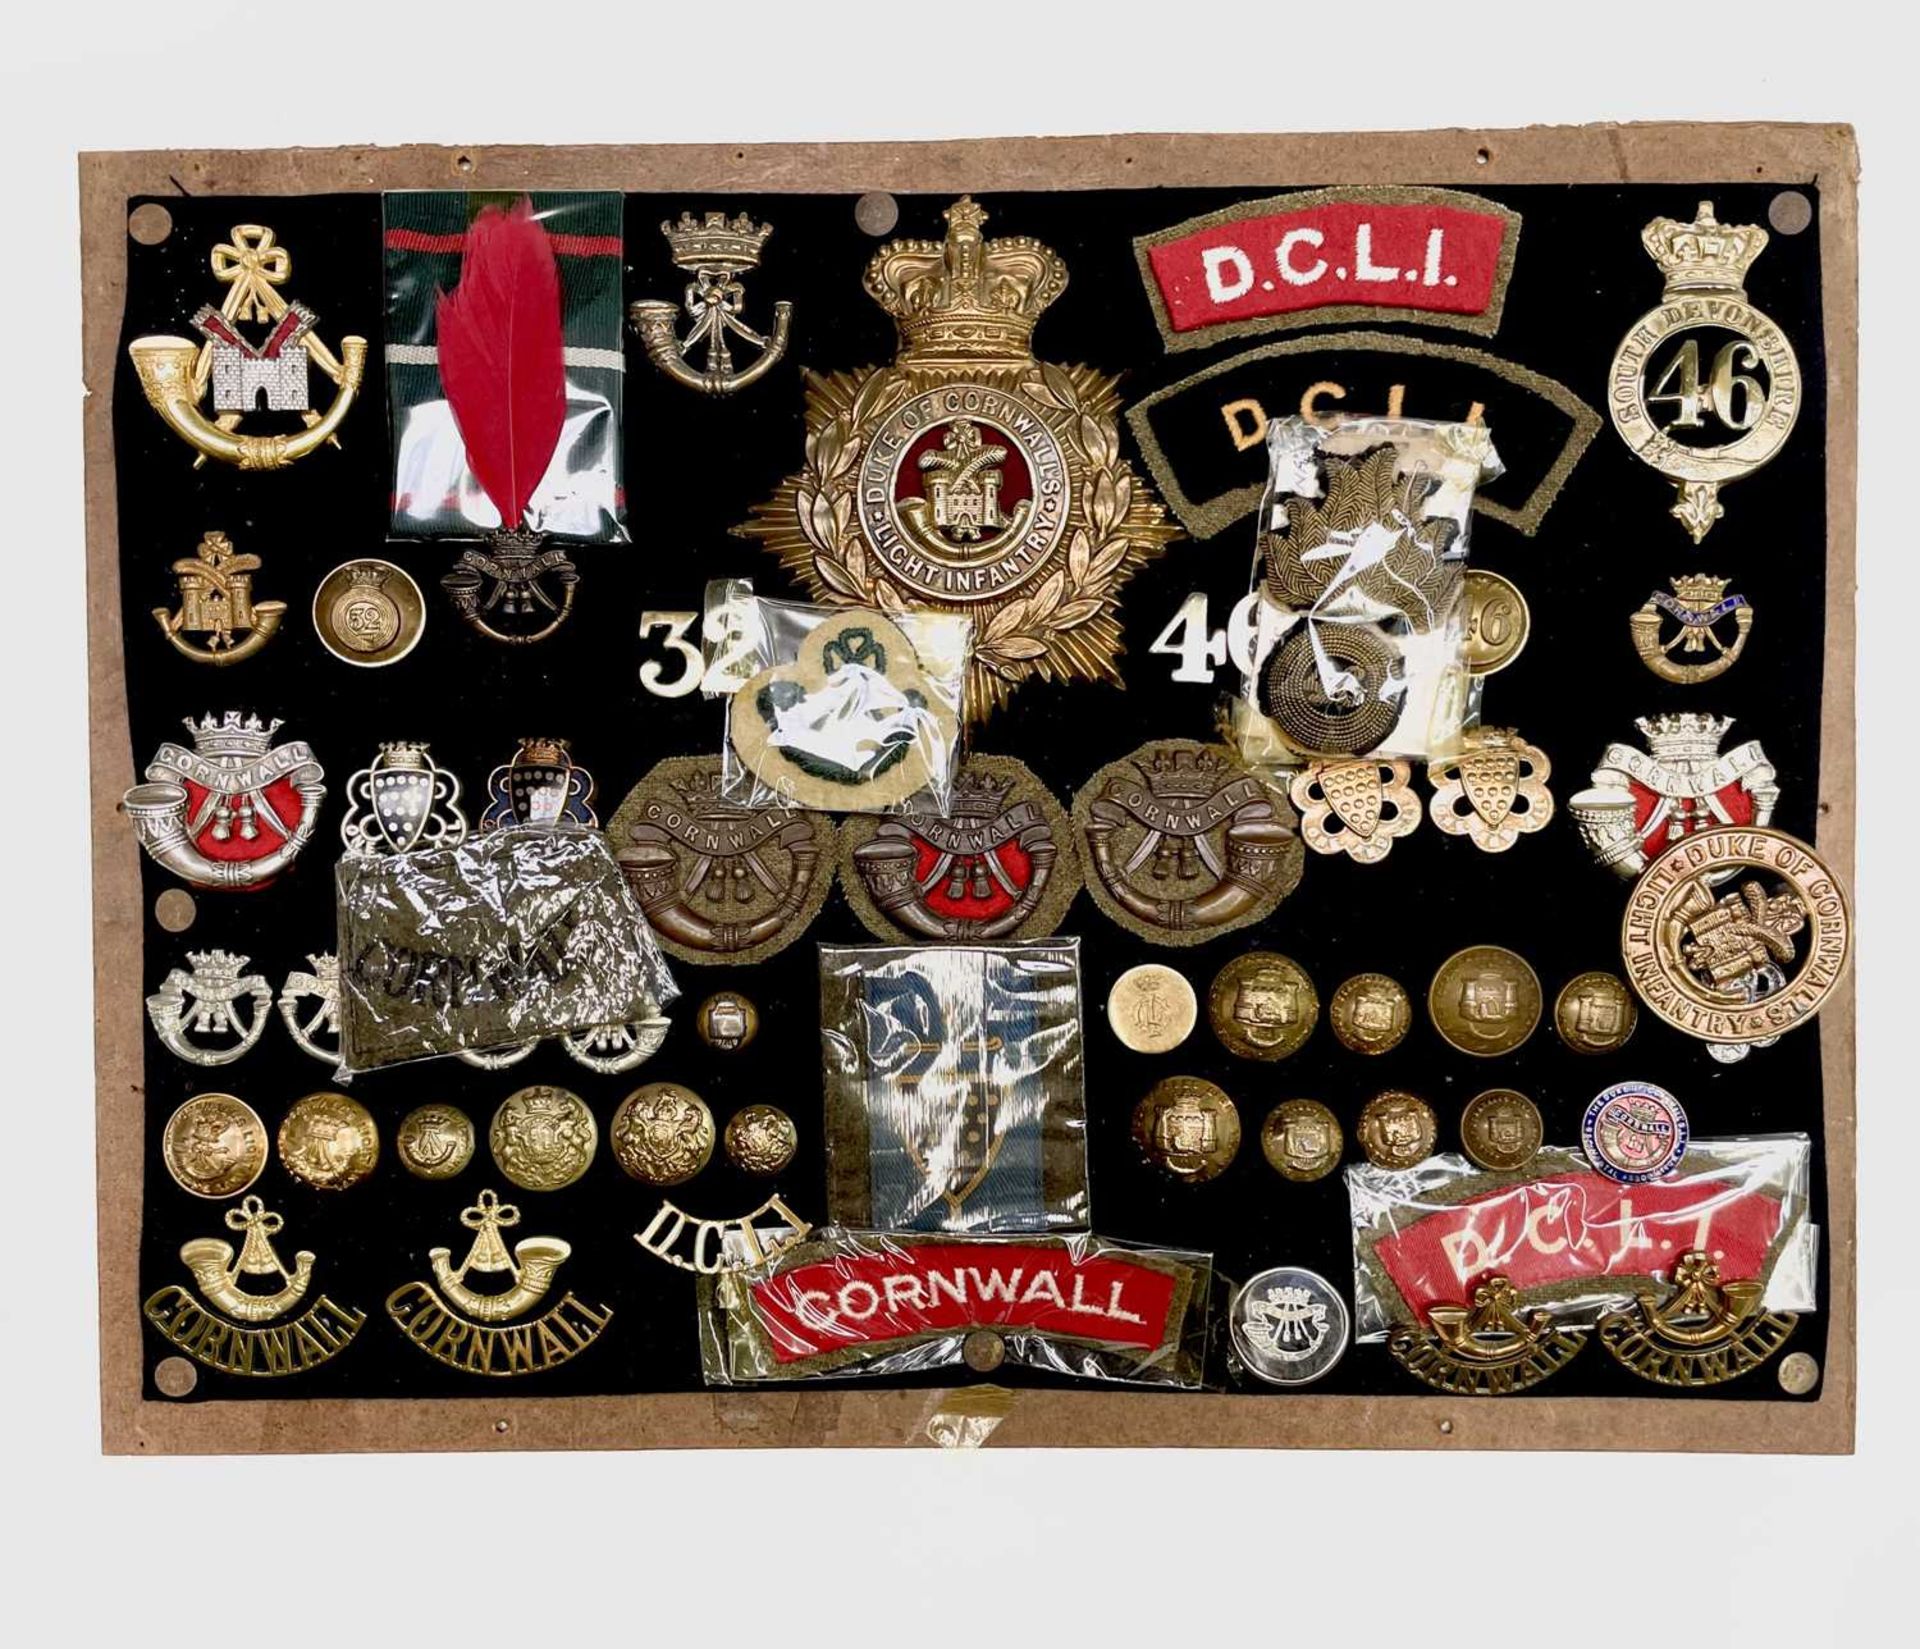 Cornwall Regiments: Duke of Cornwall Light Infantry, etc. Comprising a board mounted framed and